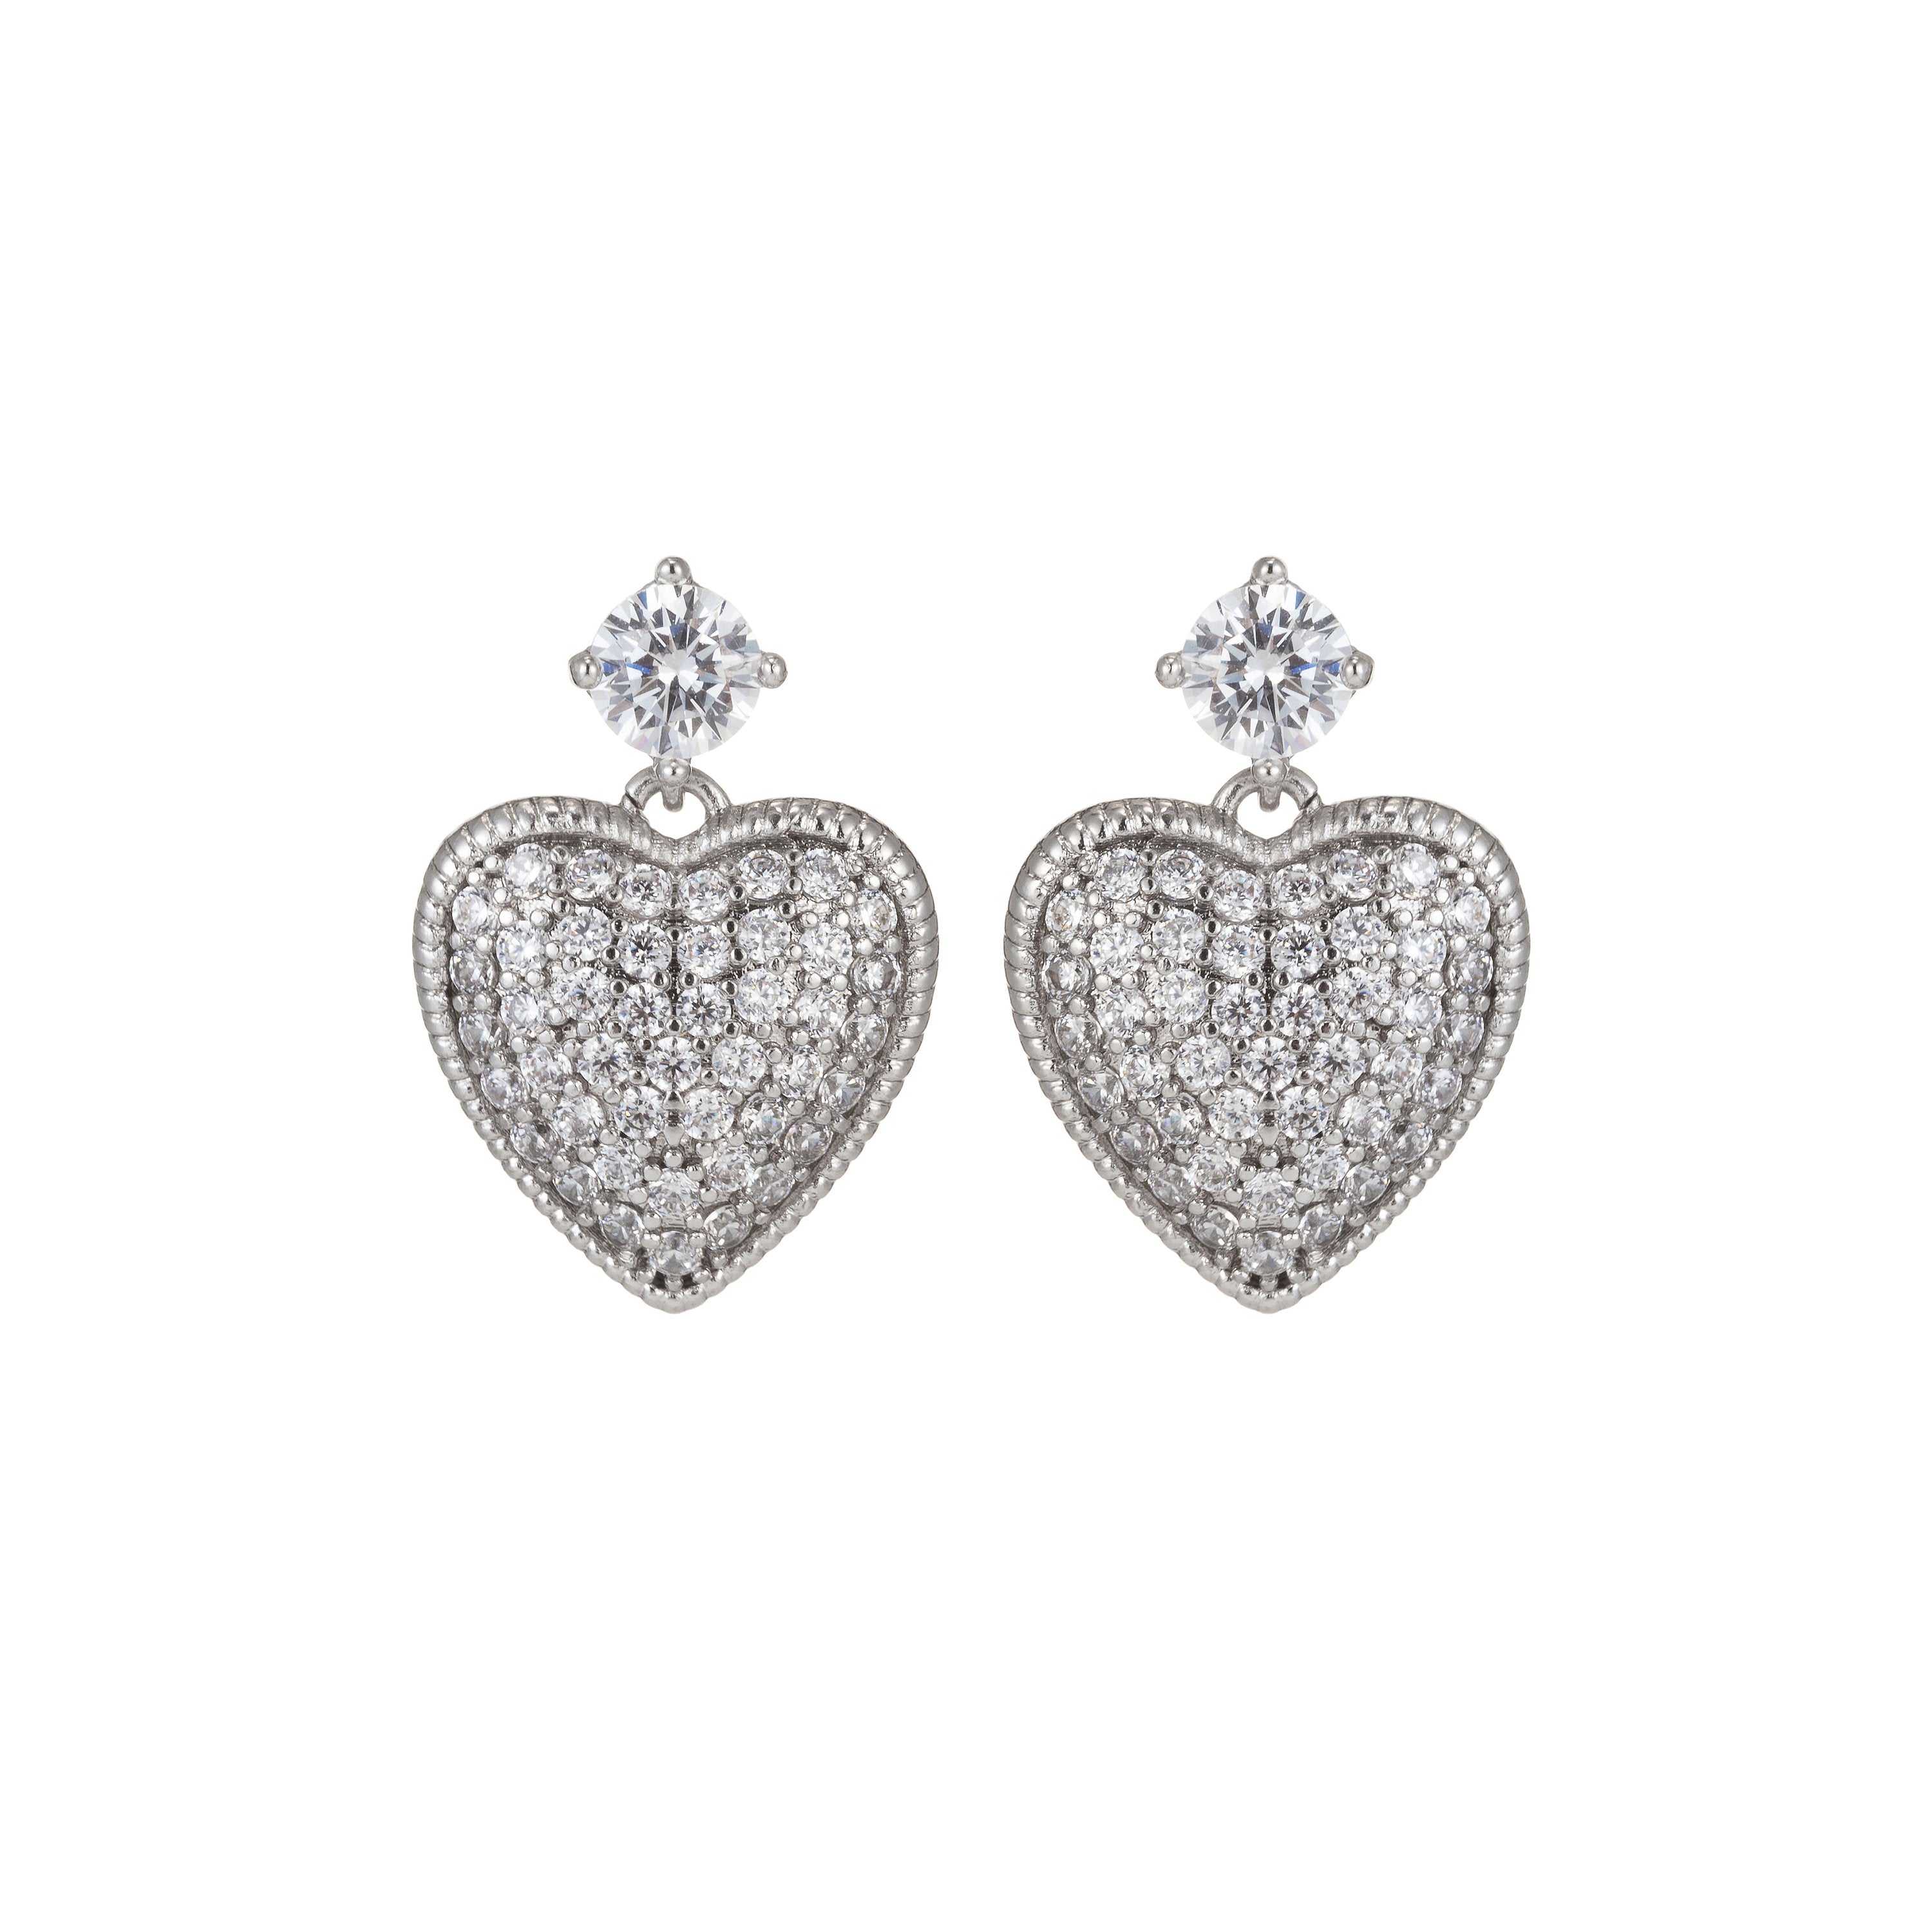 Silver Heart Stud Earrings, CZ Micro Pave Stud Earrings, Stud Earrings, Cubic Zirconia Dangle Earrings for Gift - DLUXCA